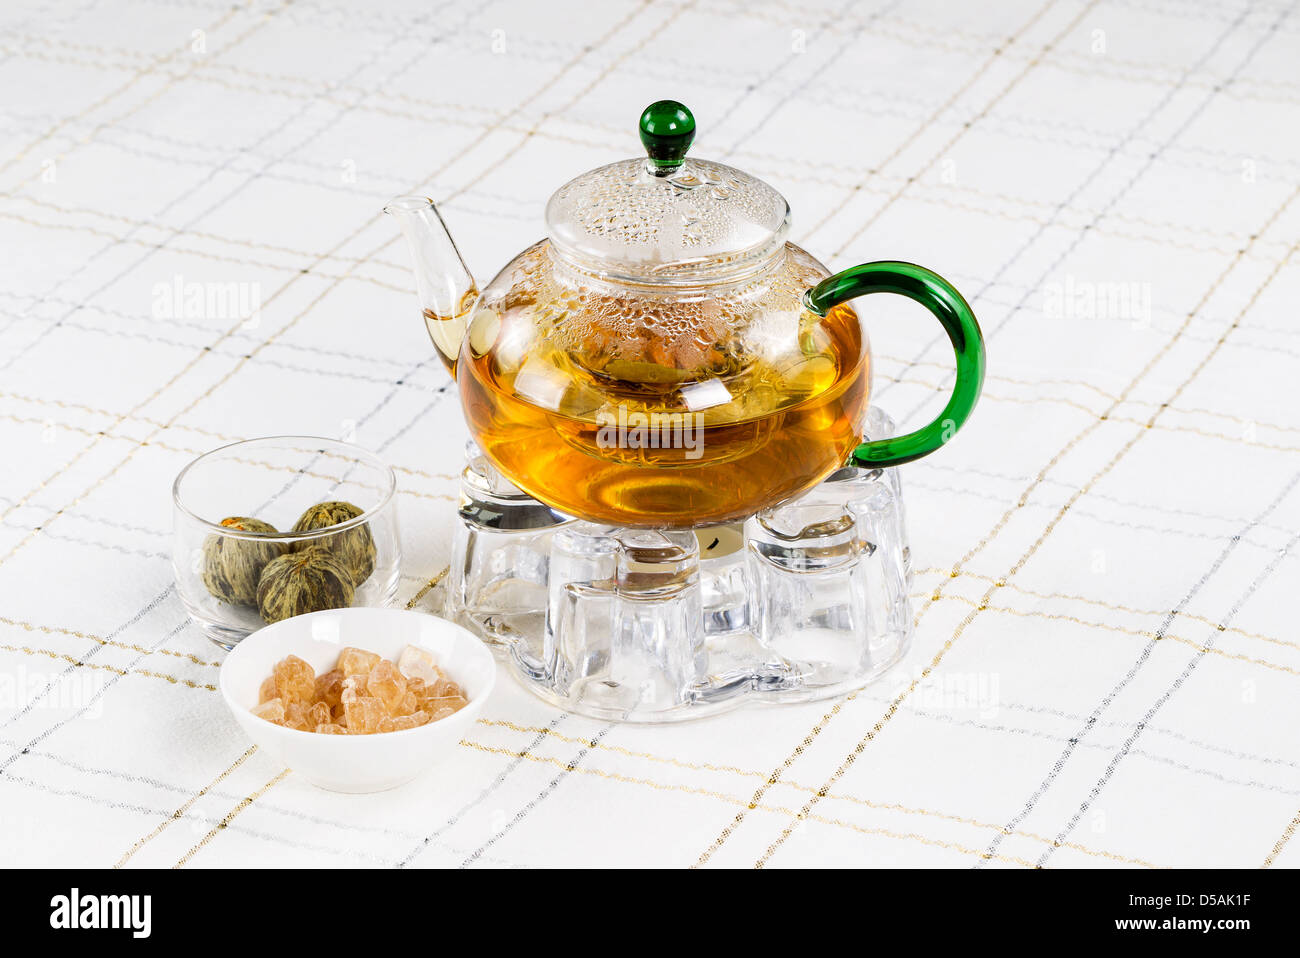 Horizontal photo of glass tea pot, holder and tea balls, sugar in bowl,  with White Striped Table Cloth in background Stock Photo - Alamy